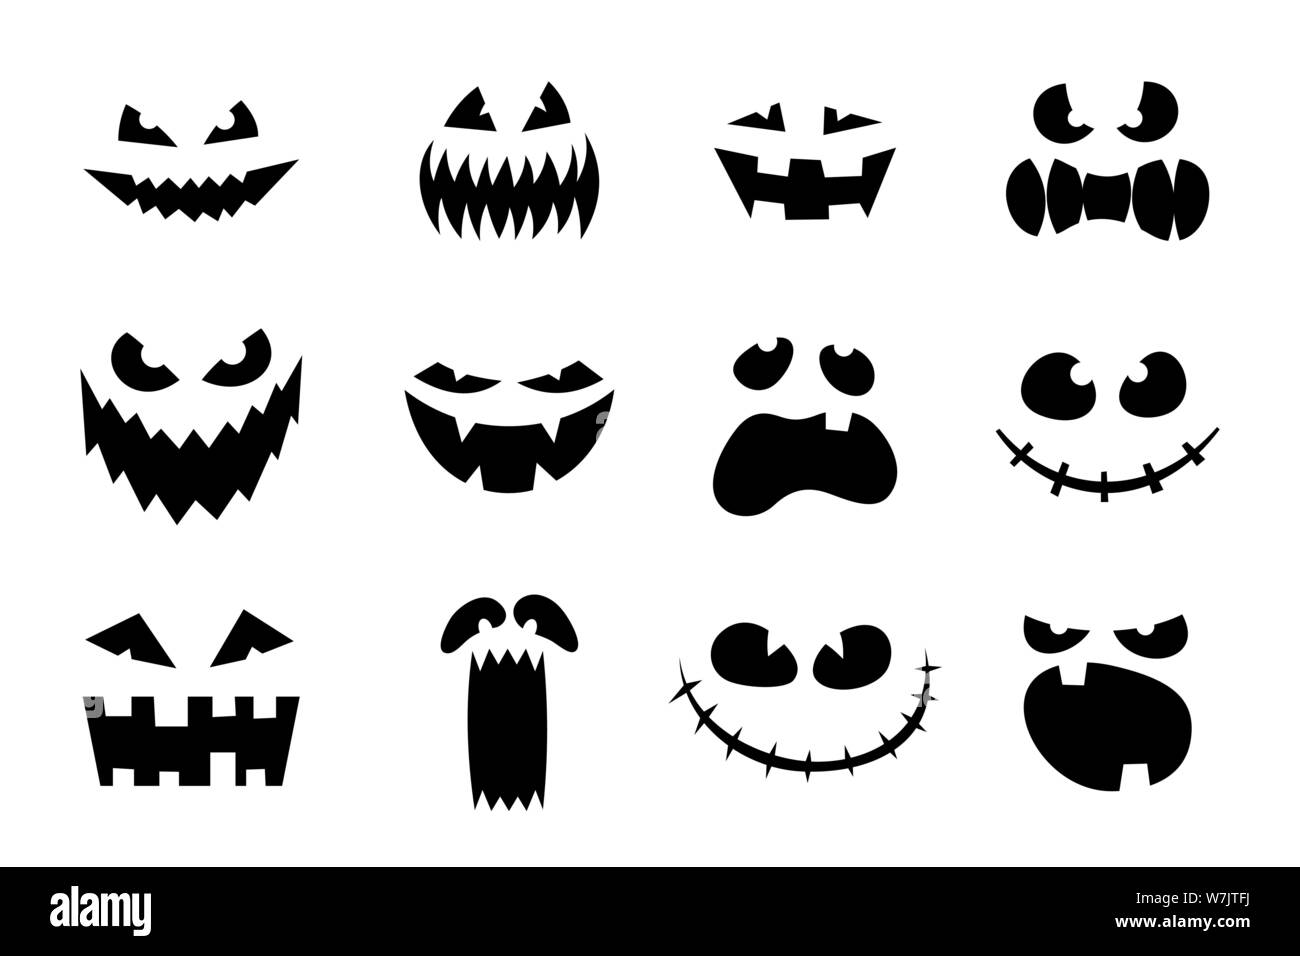 Halloween monster jack lantern pumpkin carved glowing scary face set on white background. Holiday cartoon character collection for celebration design. Vector cartoon spooky illustration Stock Vector